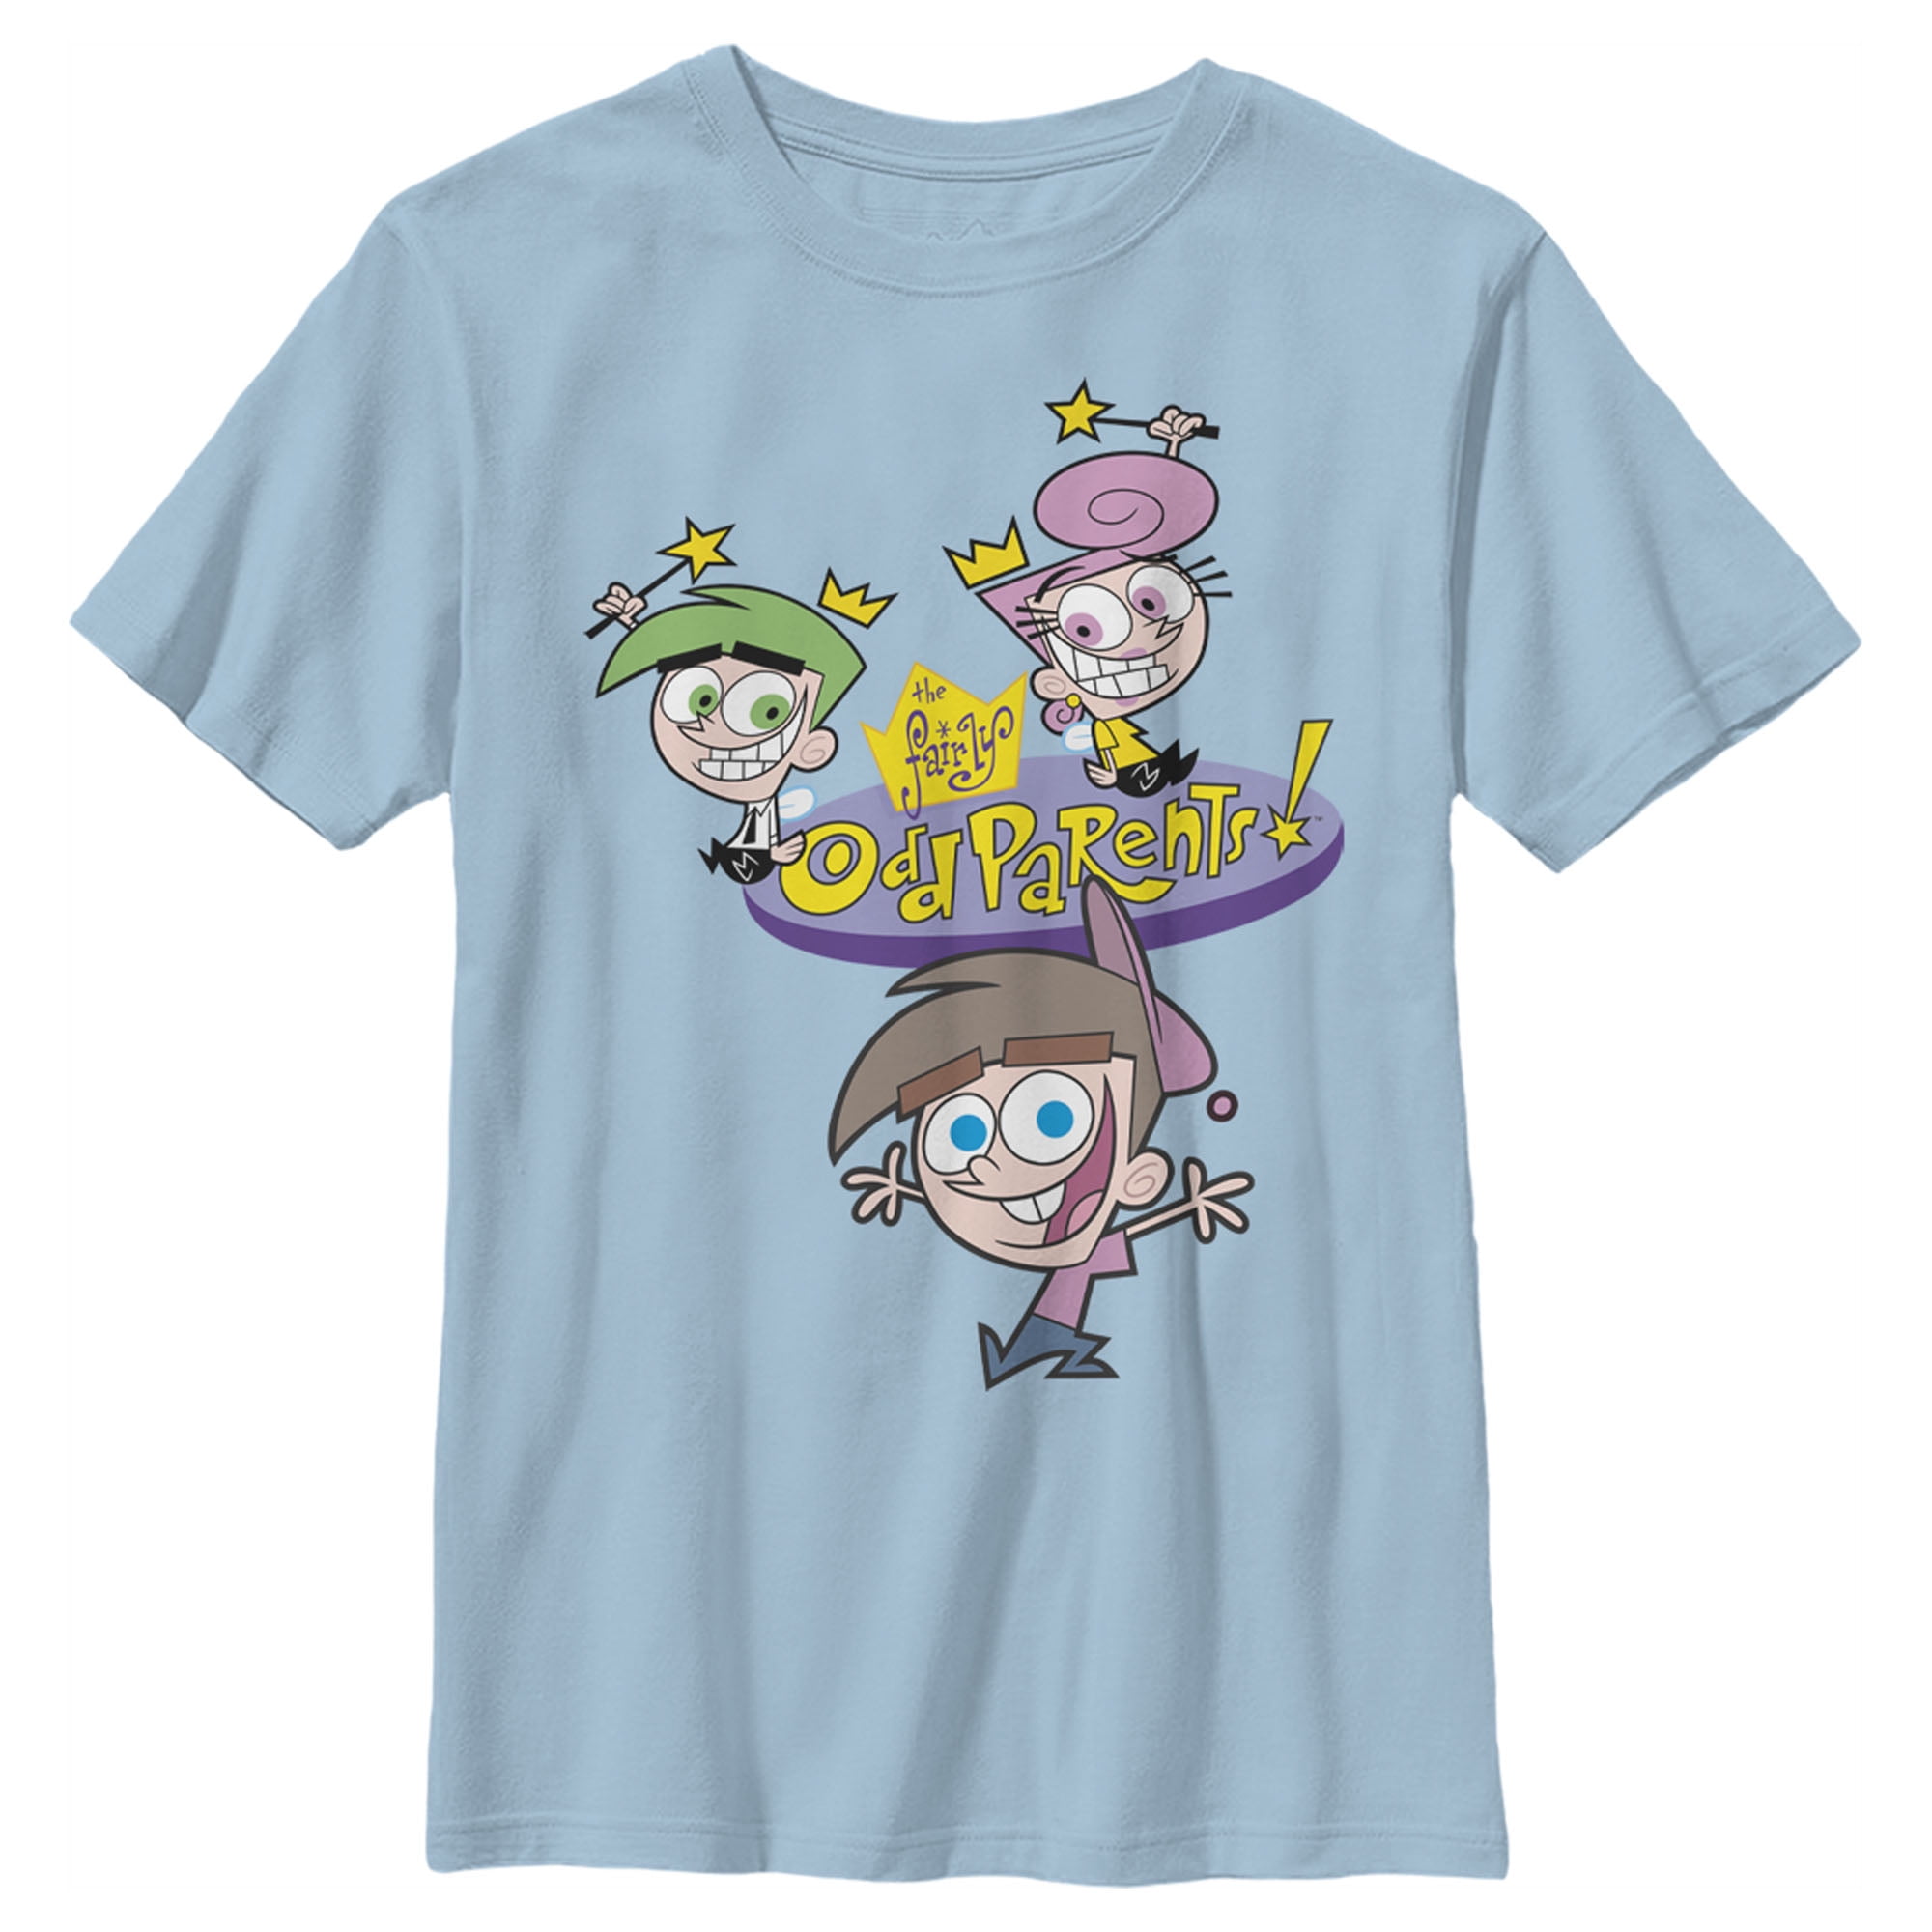 Boy's The Fairly OddParents Timmy Turner and Fairy Godparents Graphic Tee  Light Blue X Large 